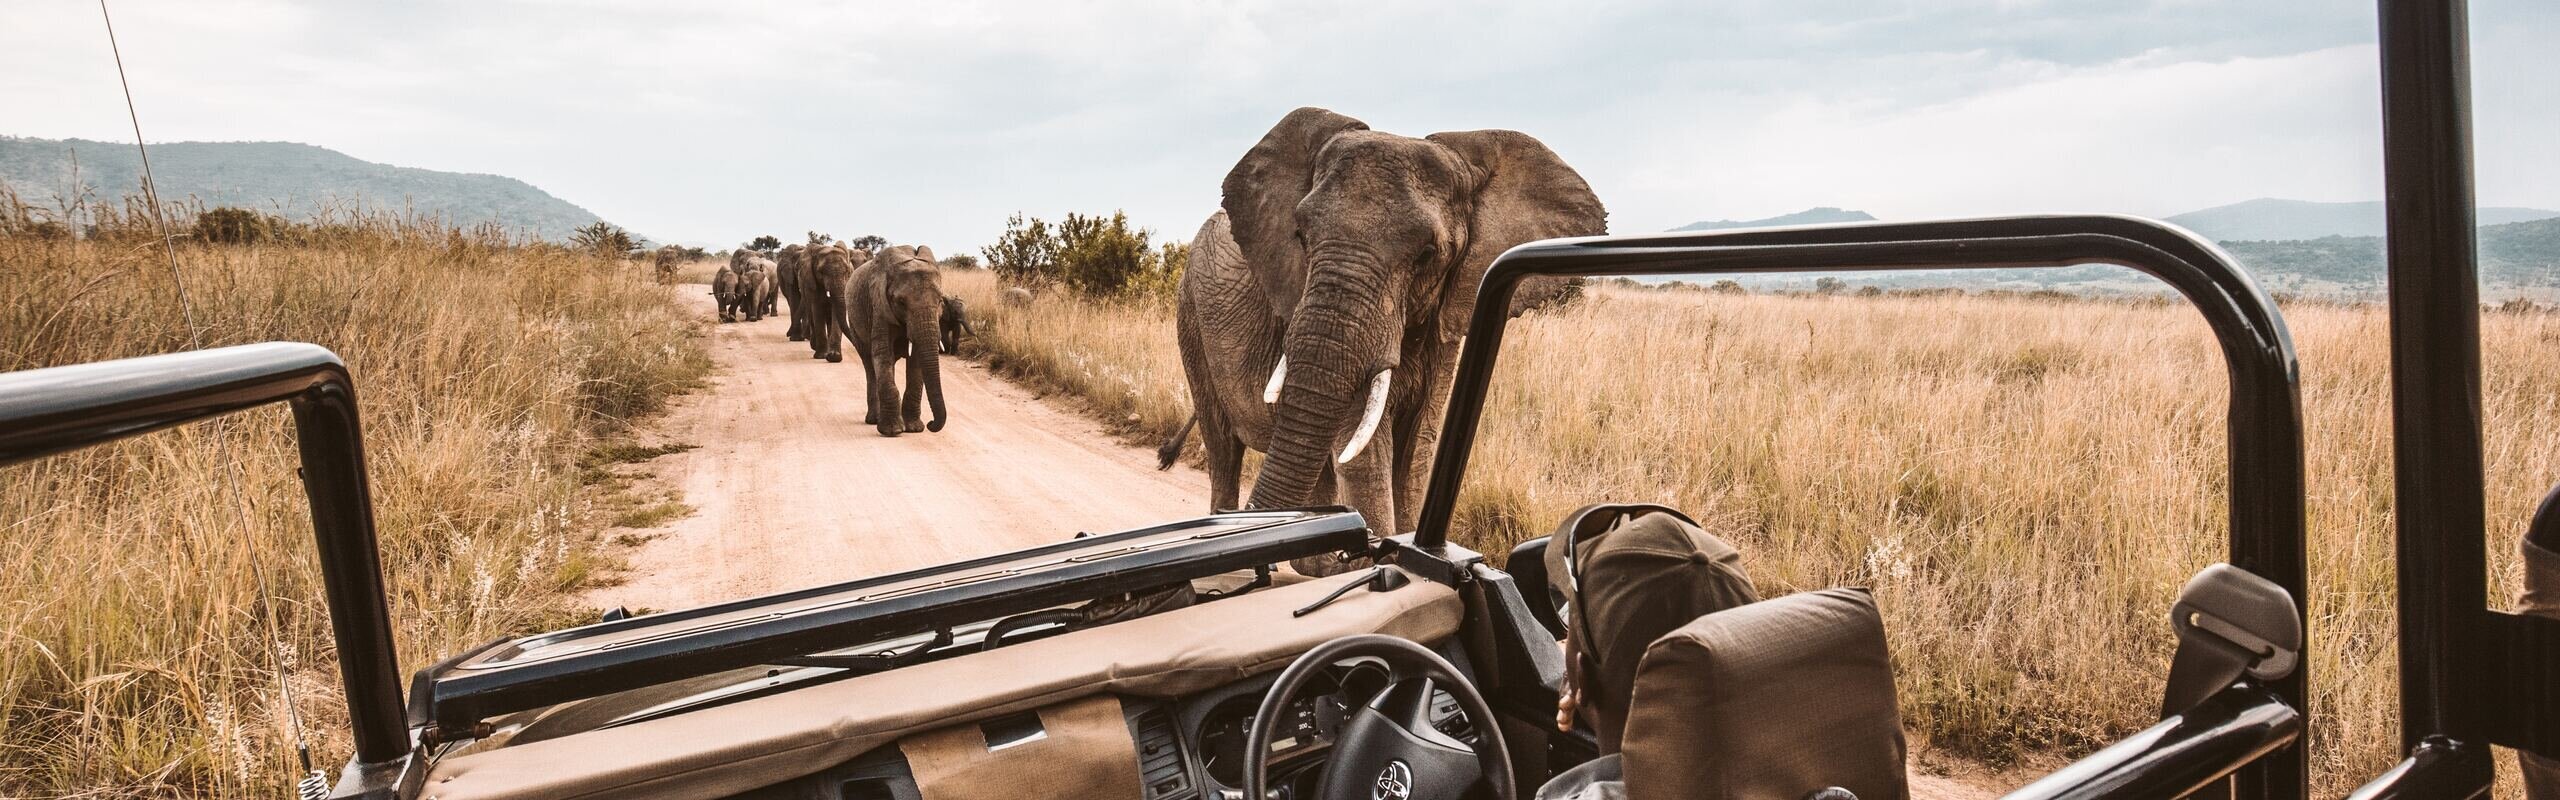 African Safari Travel Guide: Customize  a Personalized Trip